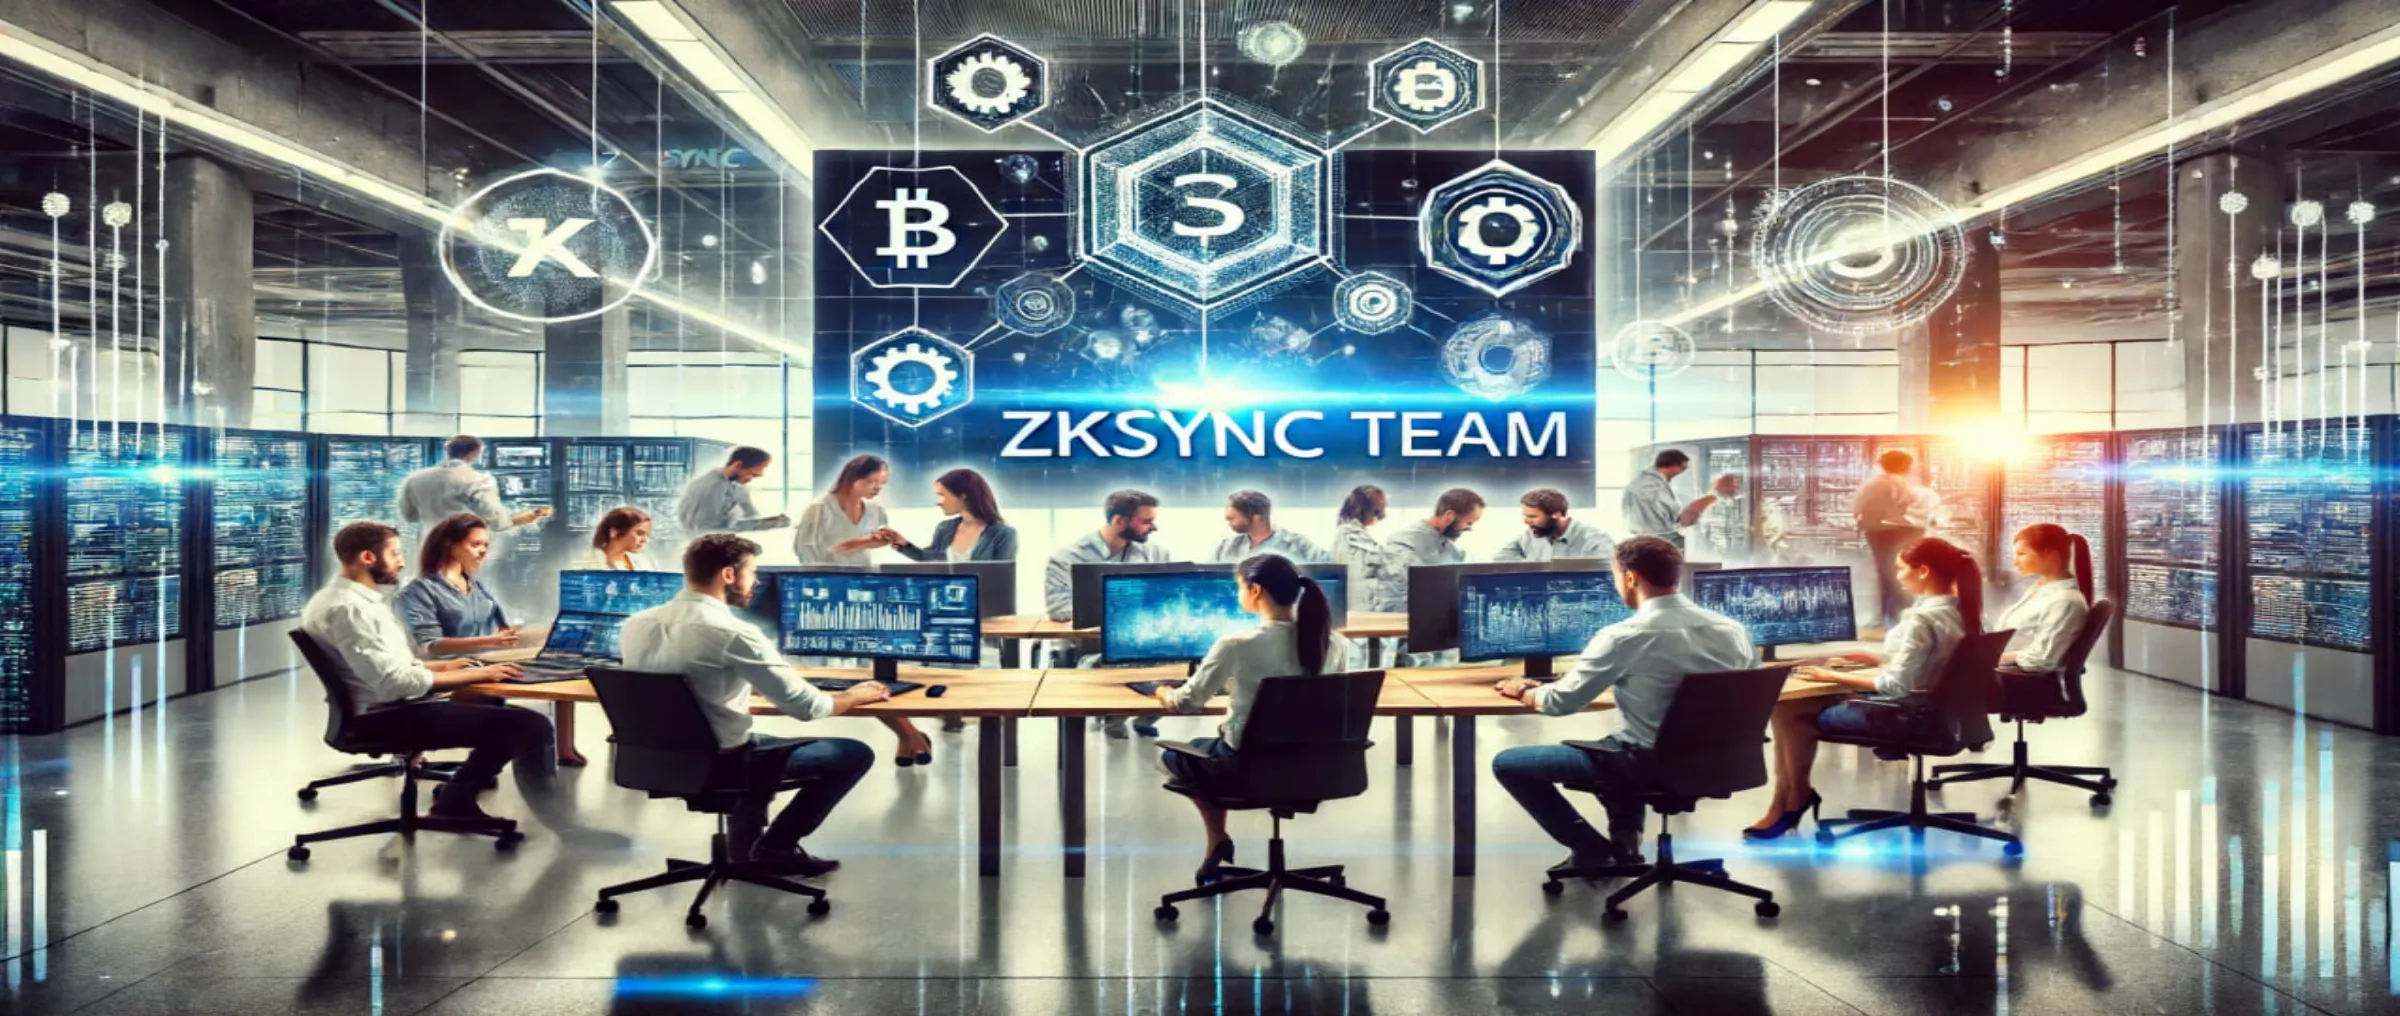 The ZKsync team released a clarification on the controversial points of the airdrop